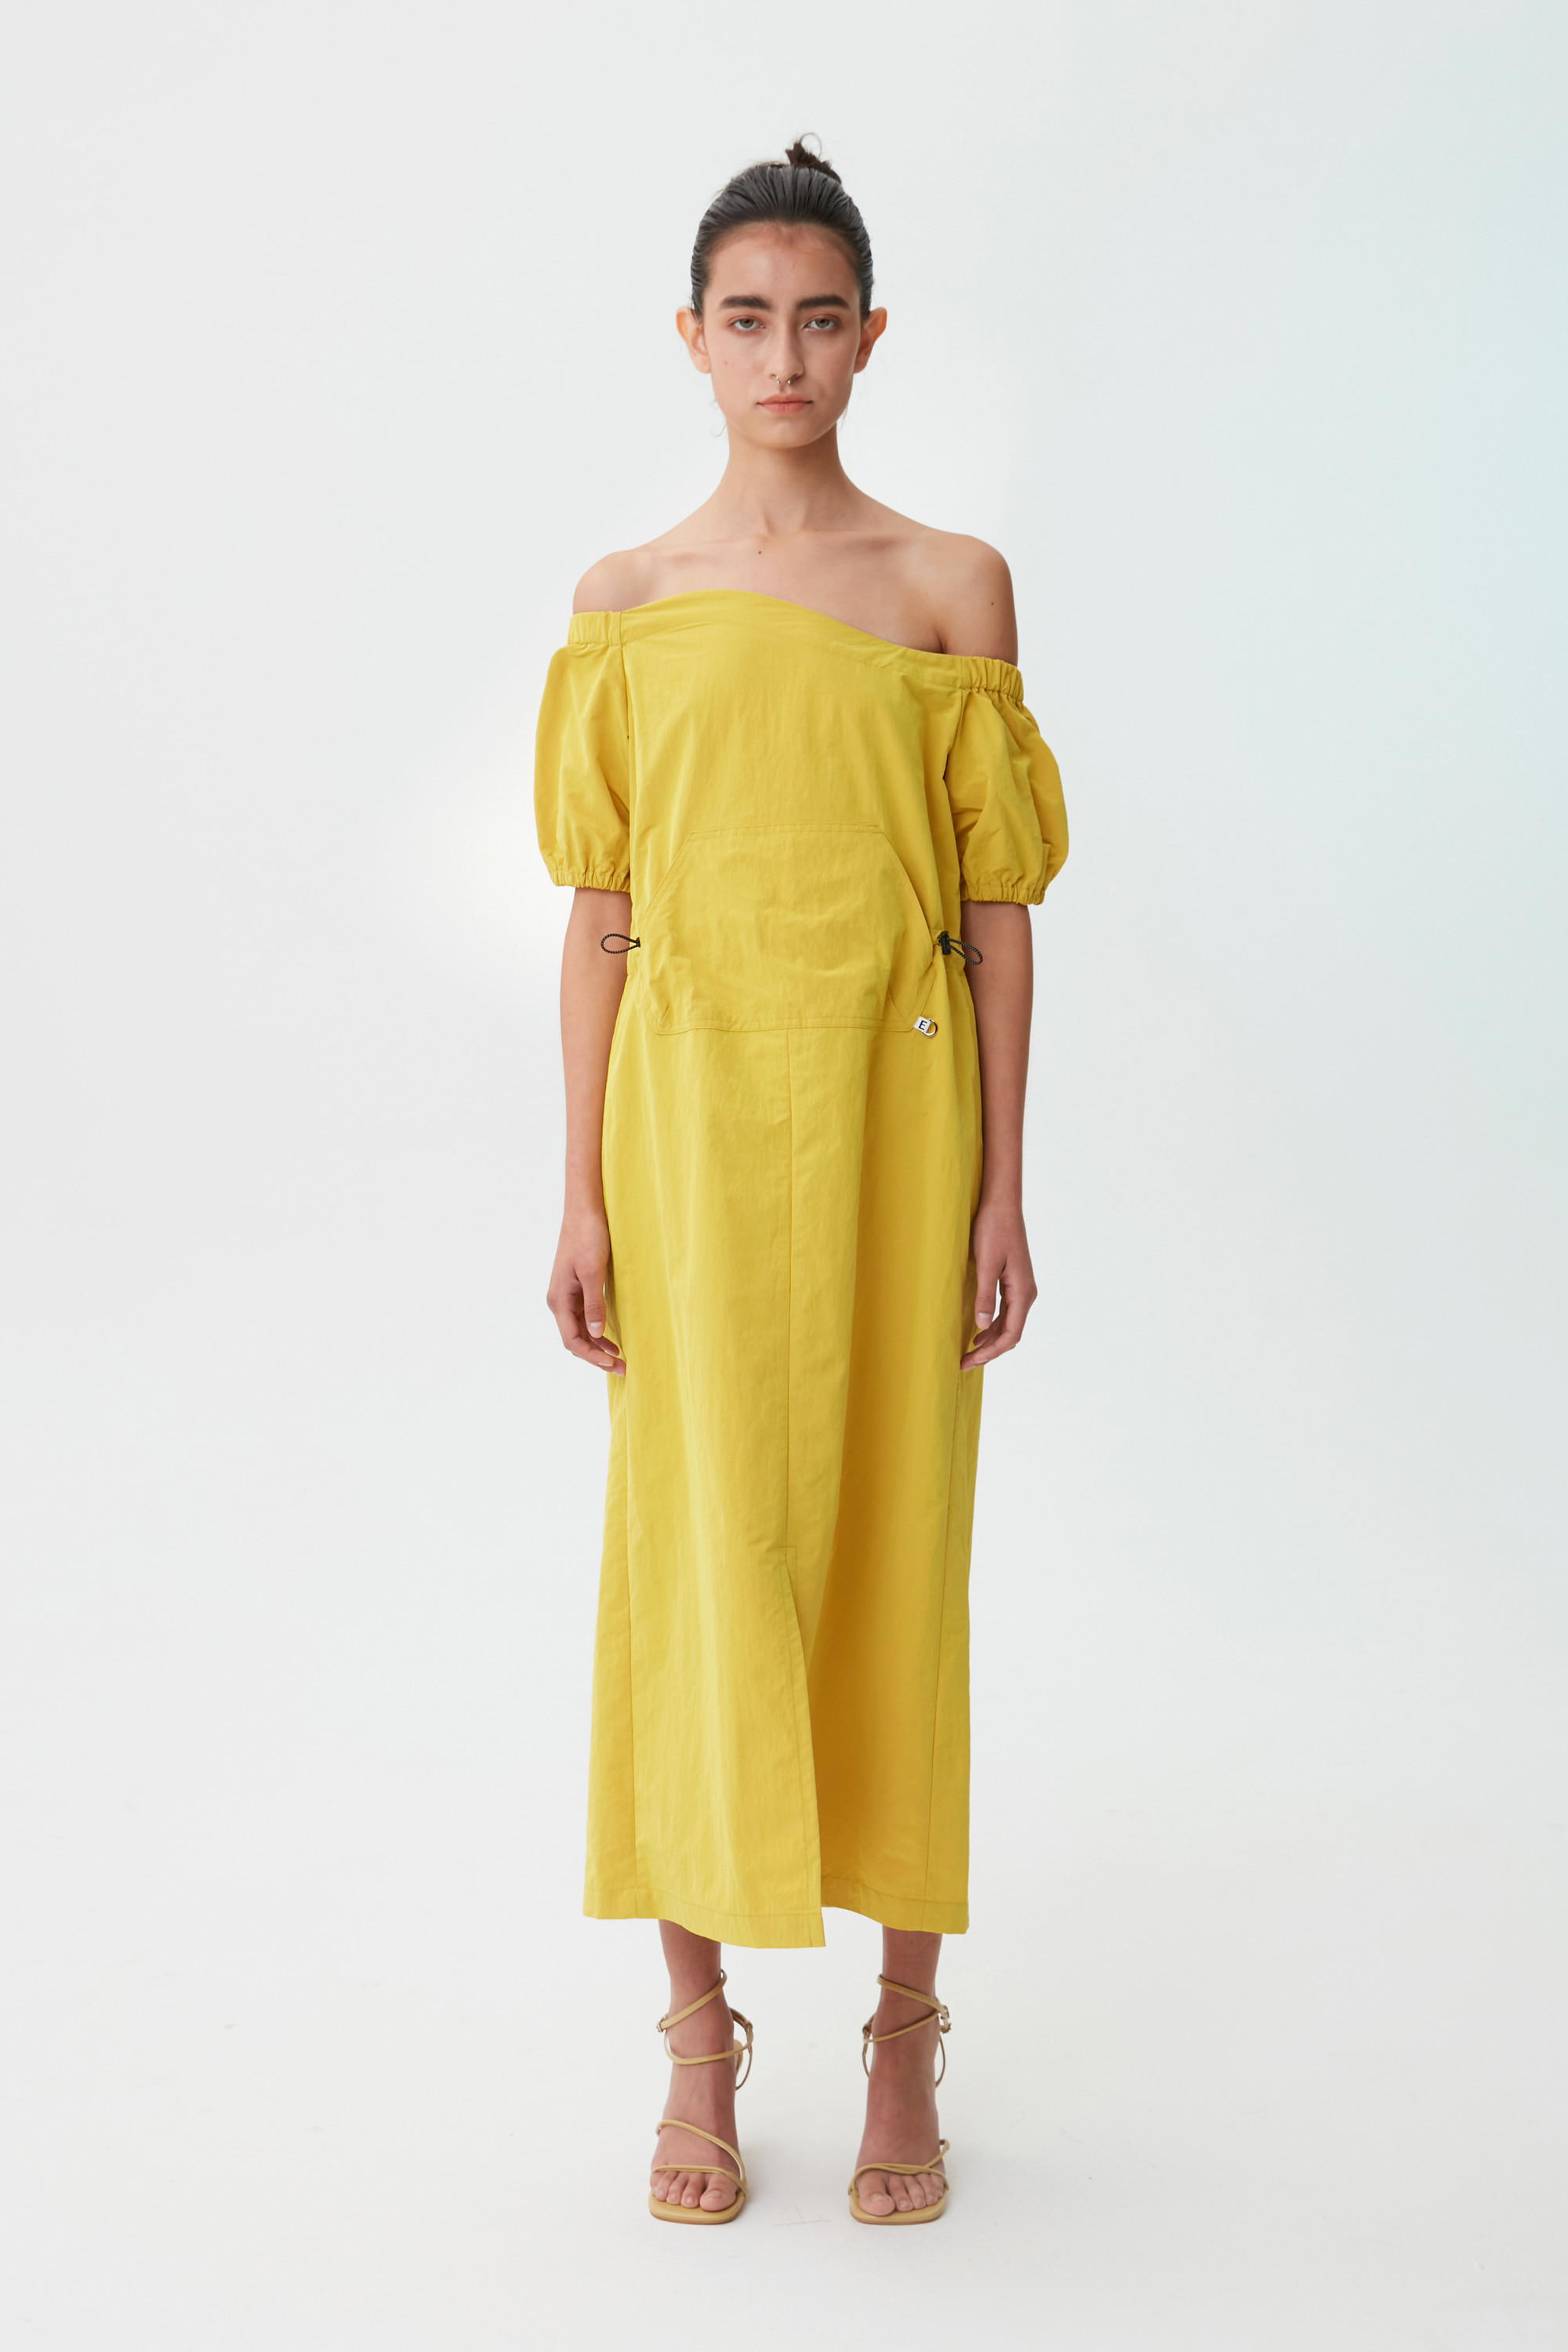 WAVE OFF-THE SHOULDER DRESS (YELLOW)